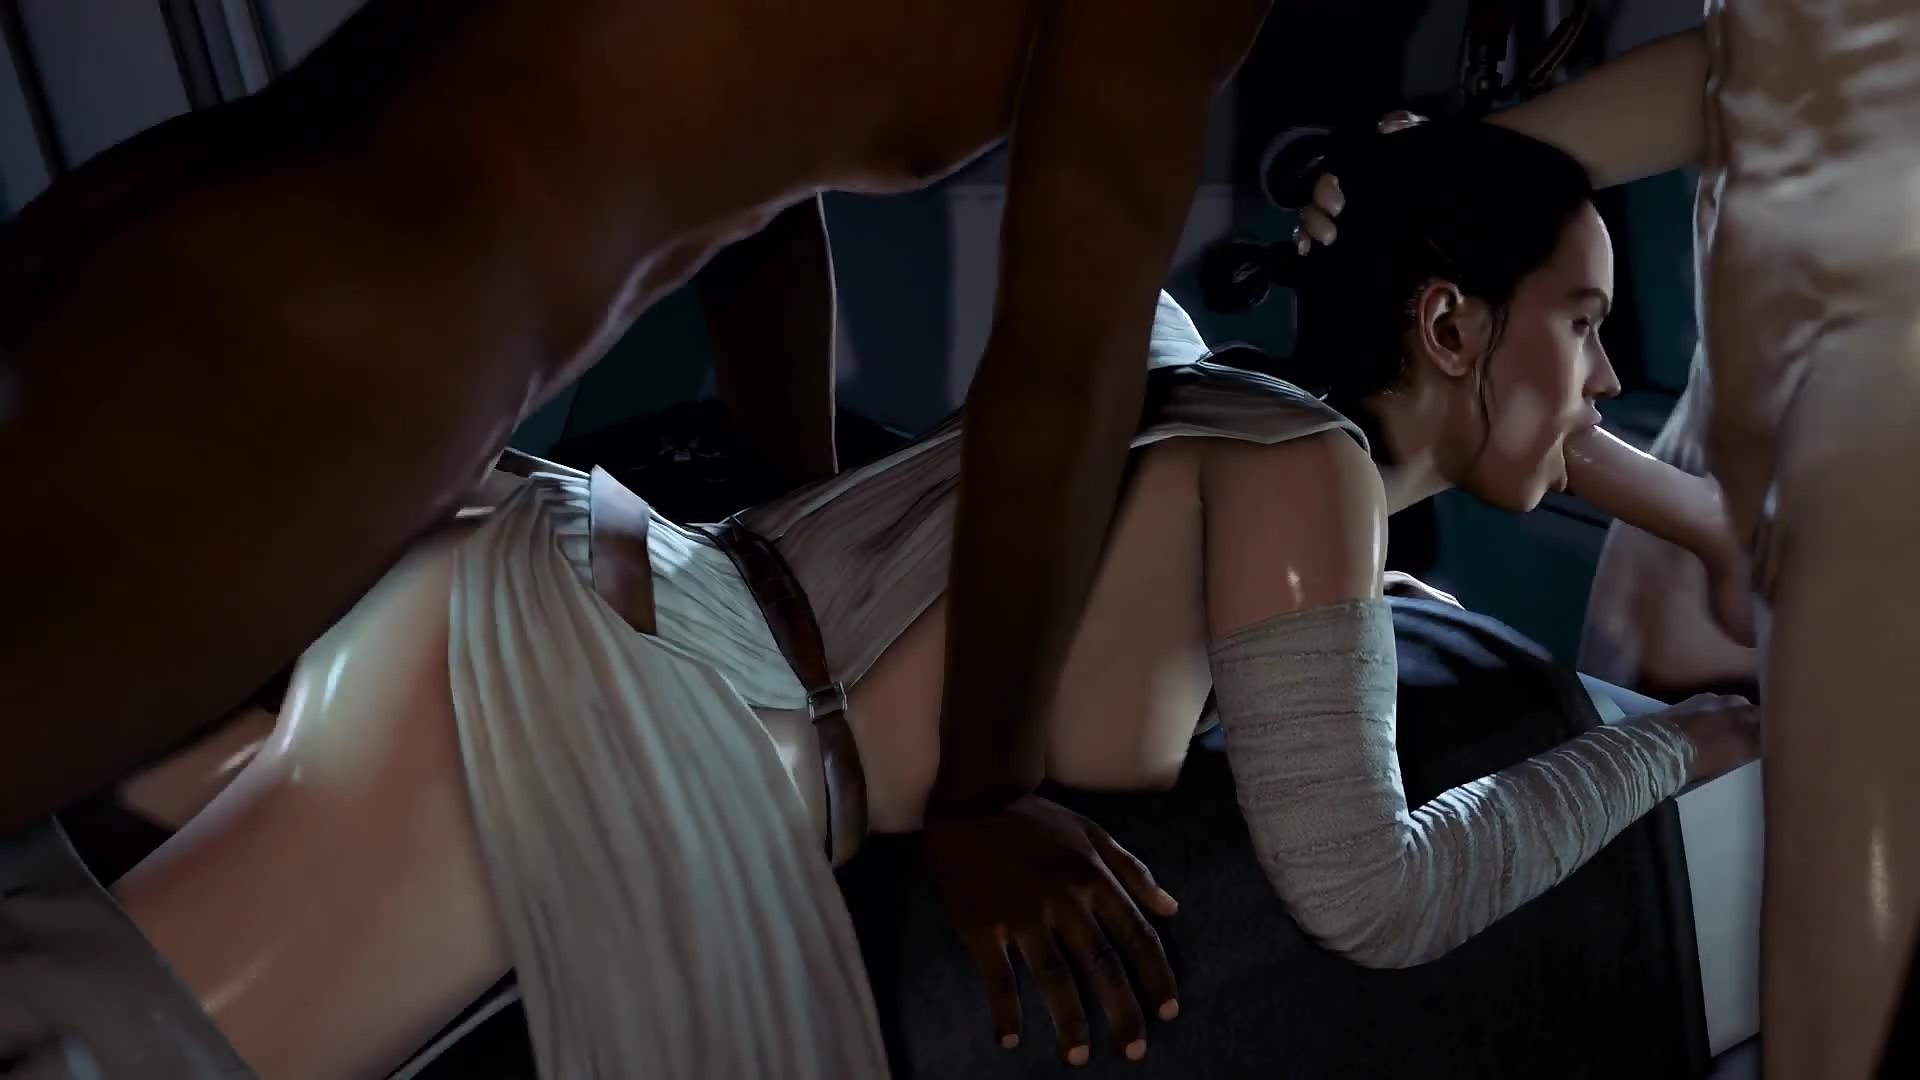 Star Whores The Slut Awakens Rey gets threesome rough anal fuck with stormtroopers